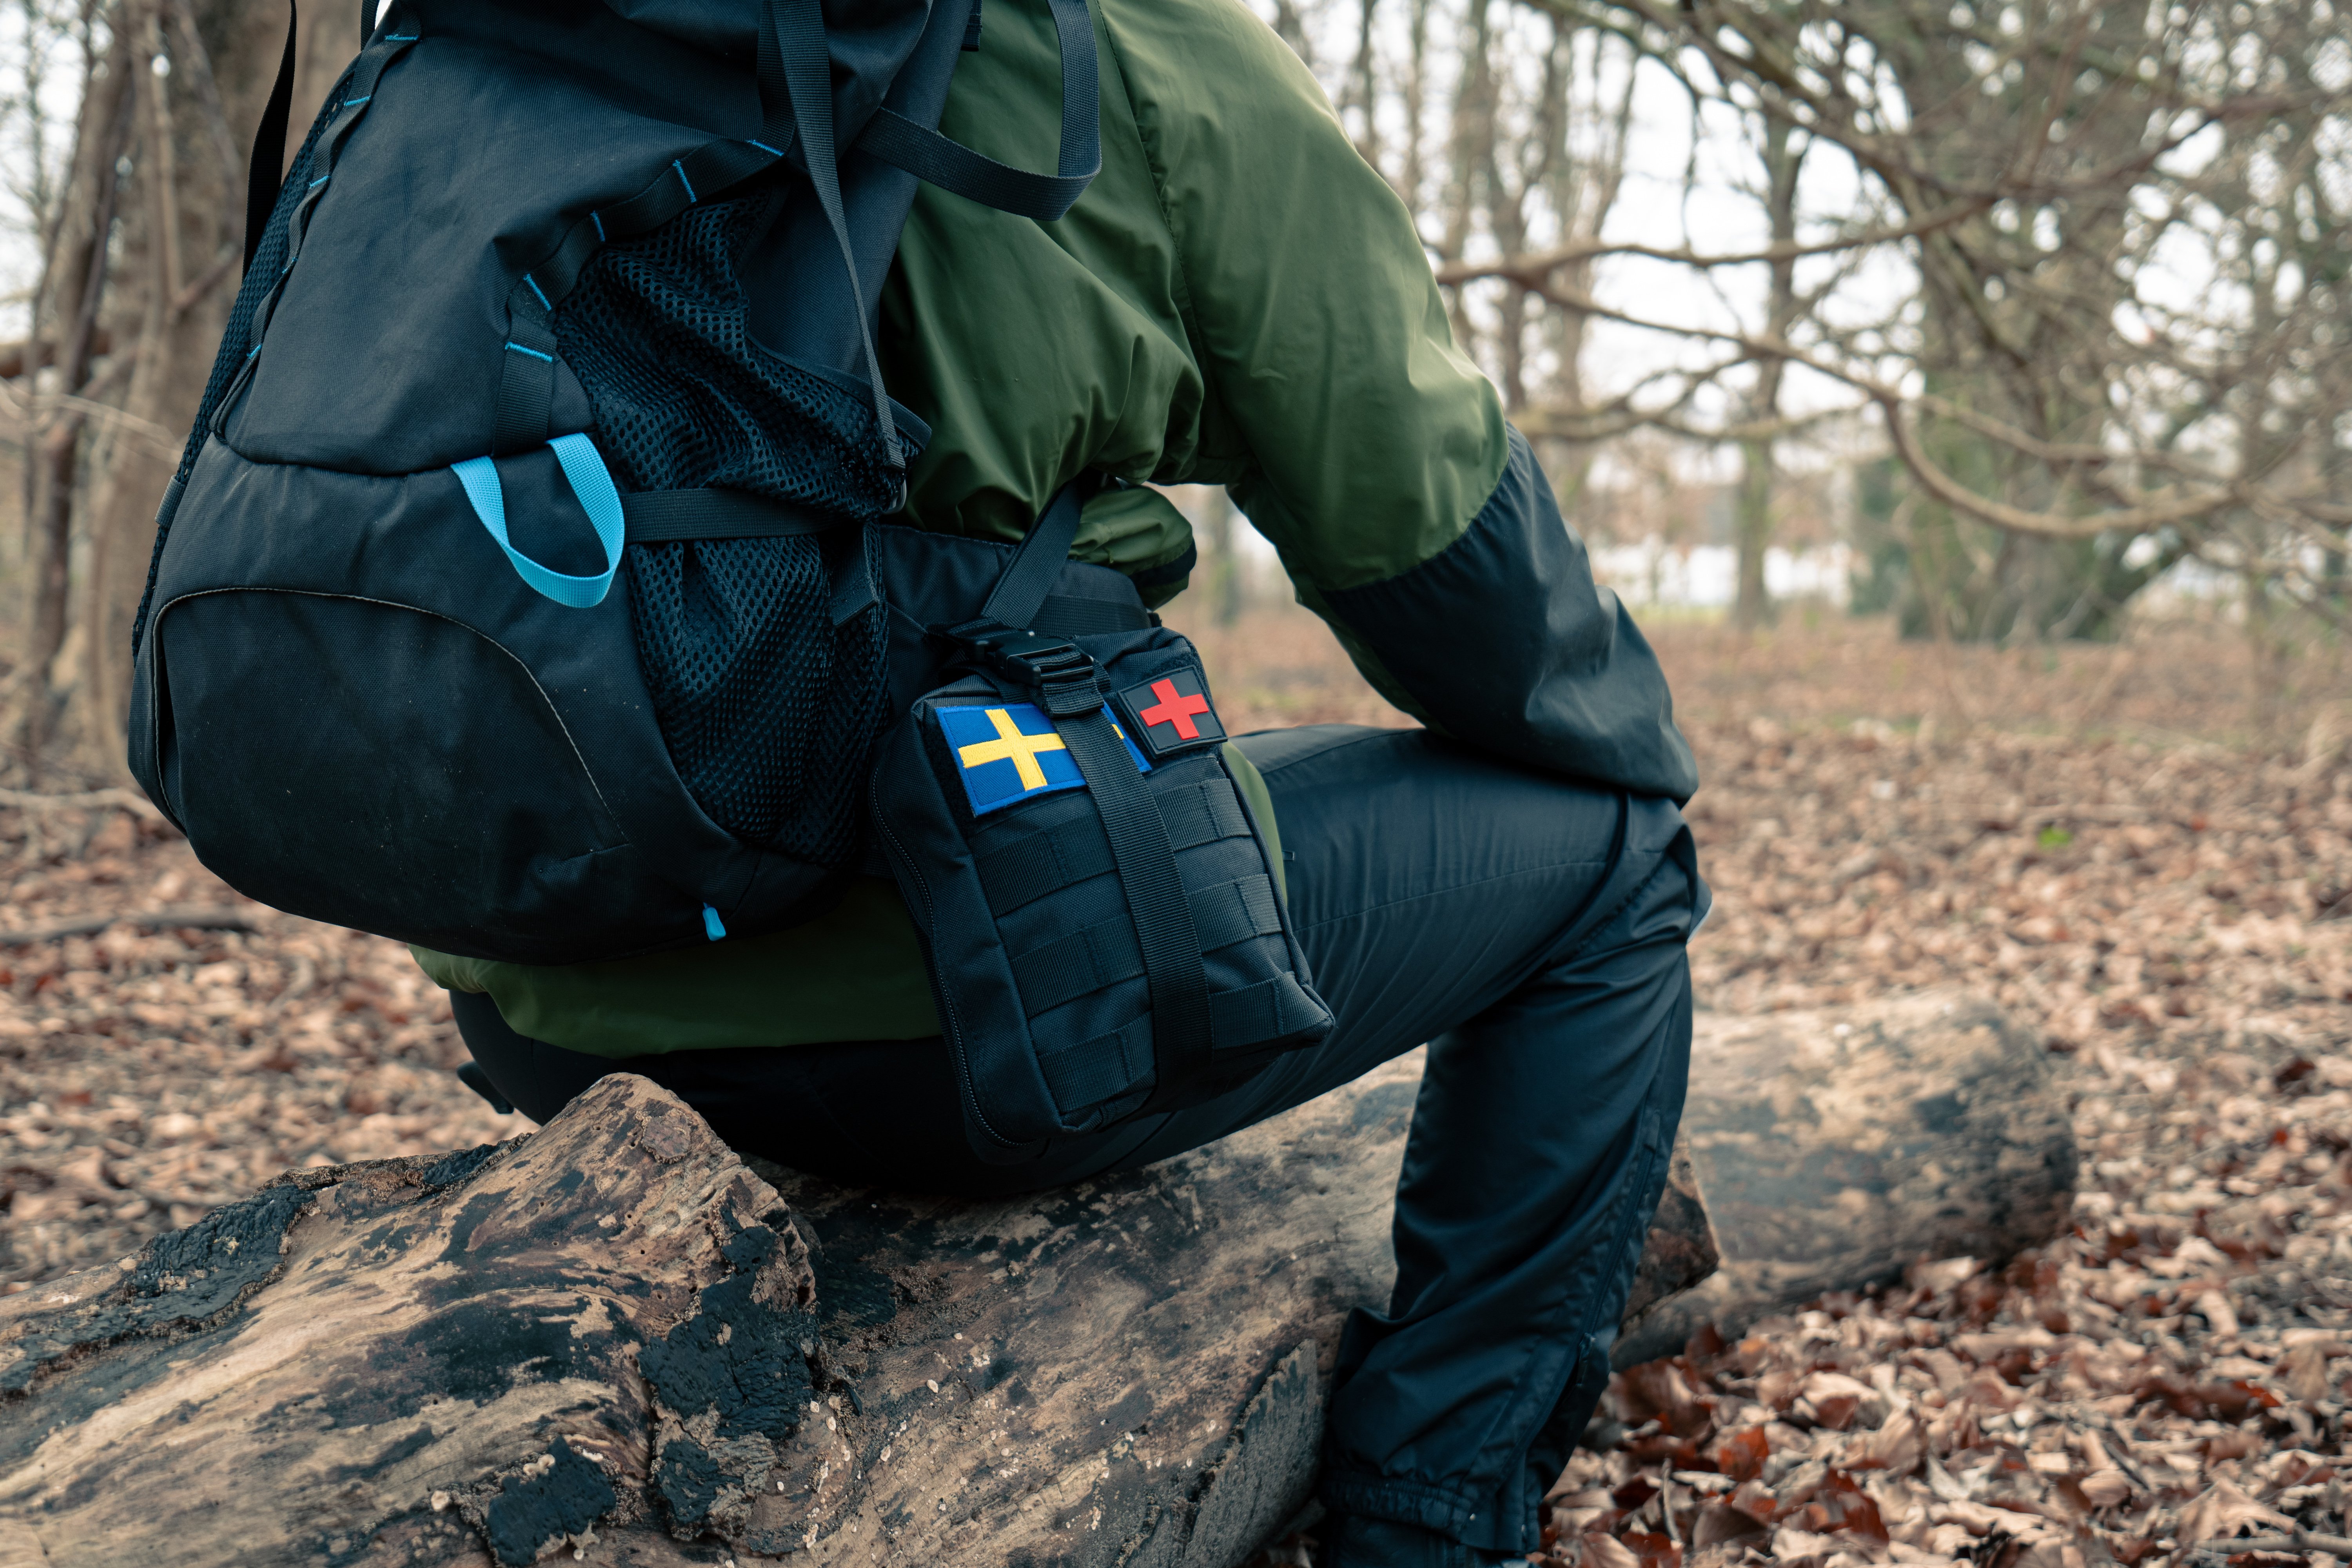 A person wearing a survival kit in a forested area